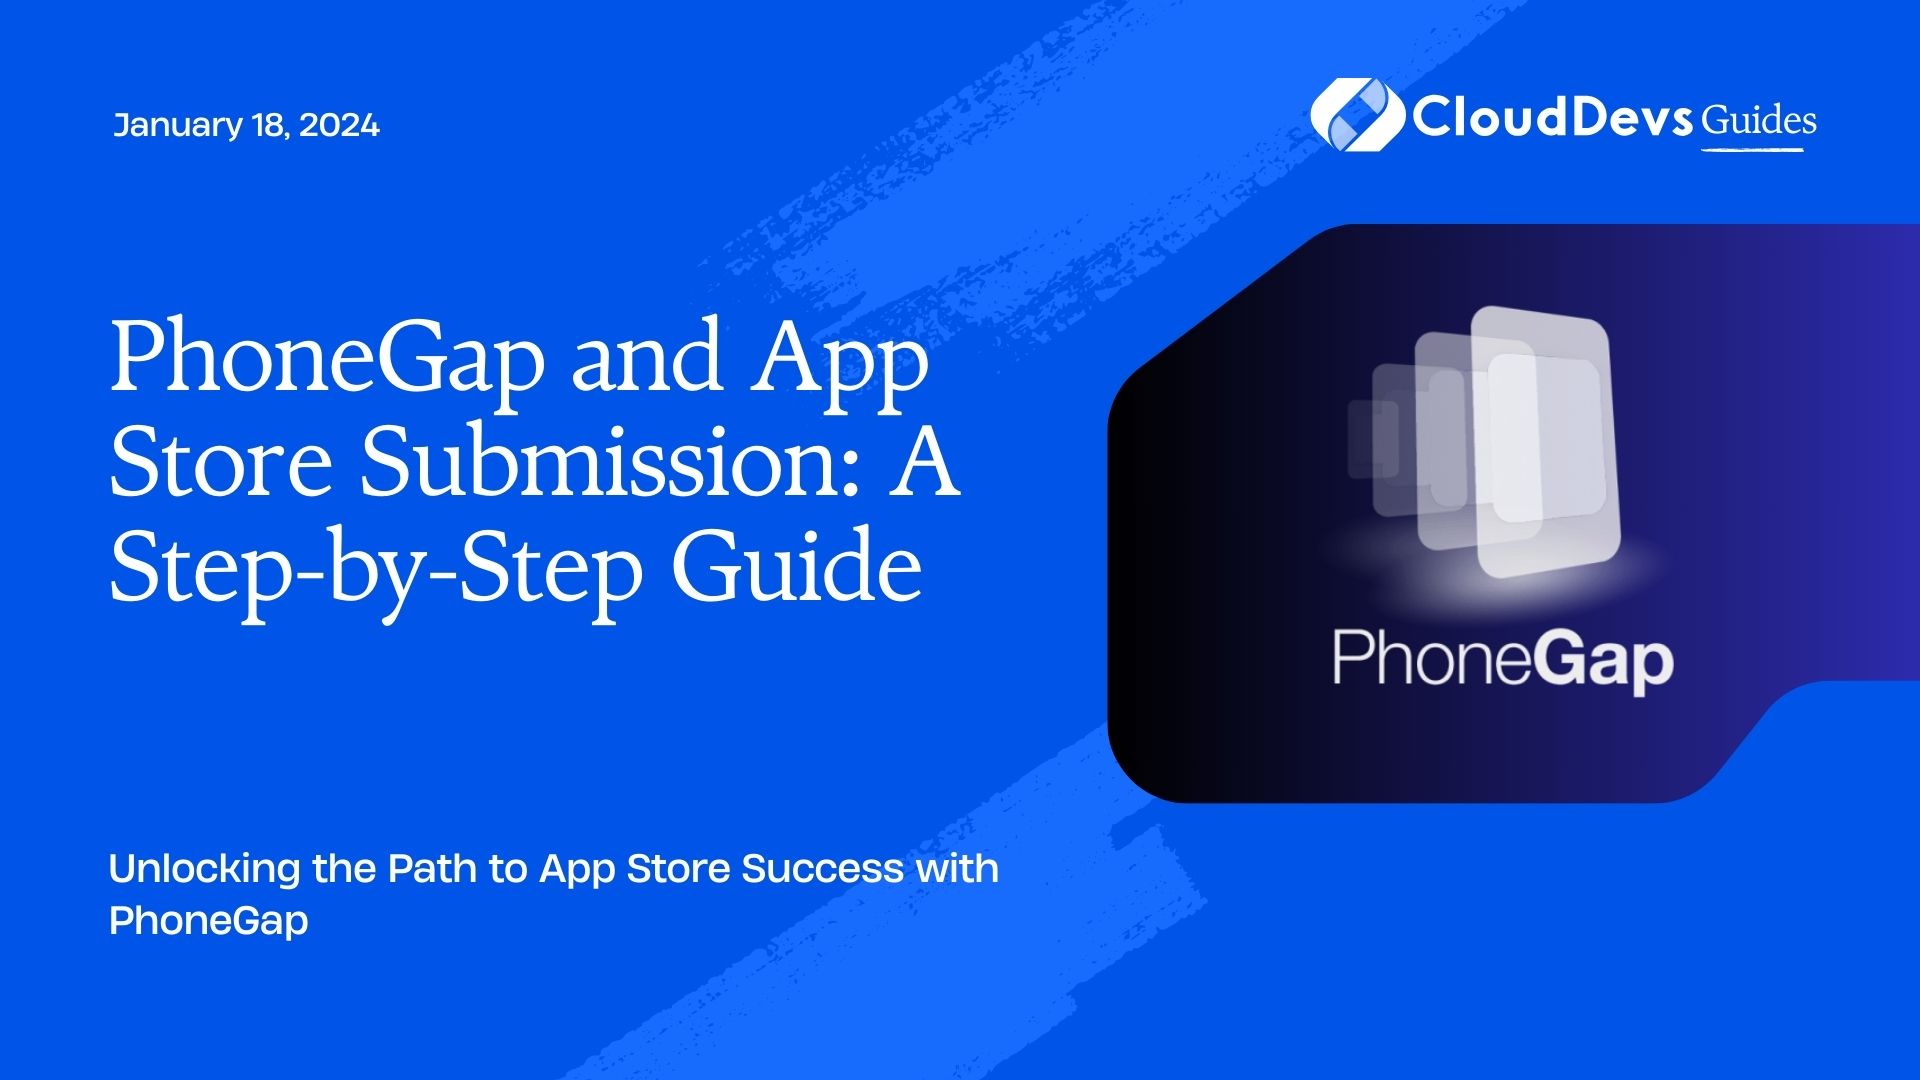 PhoneGap and App Store Submission: A Step-by-Step Guide